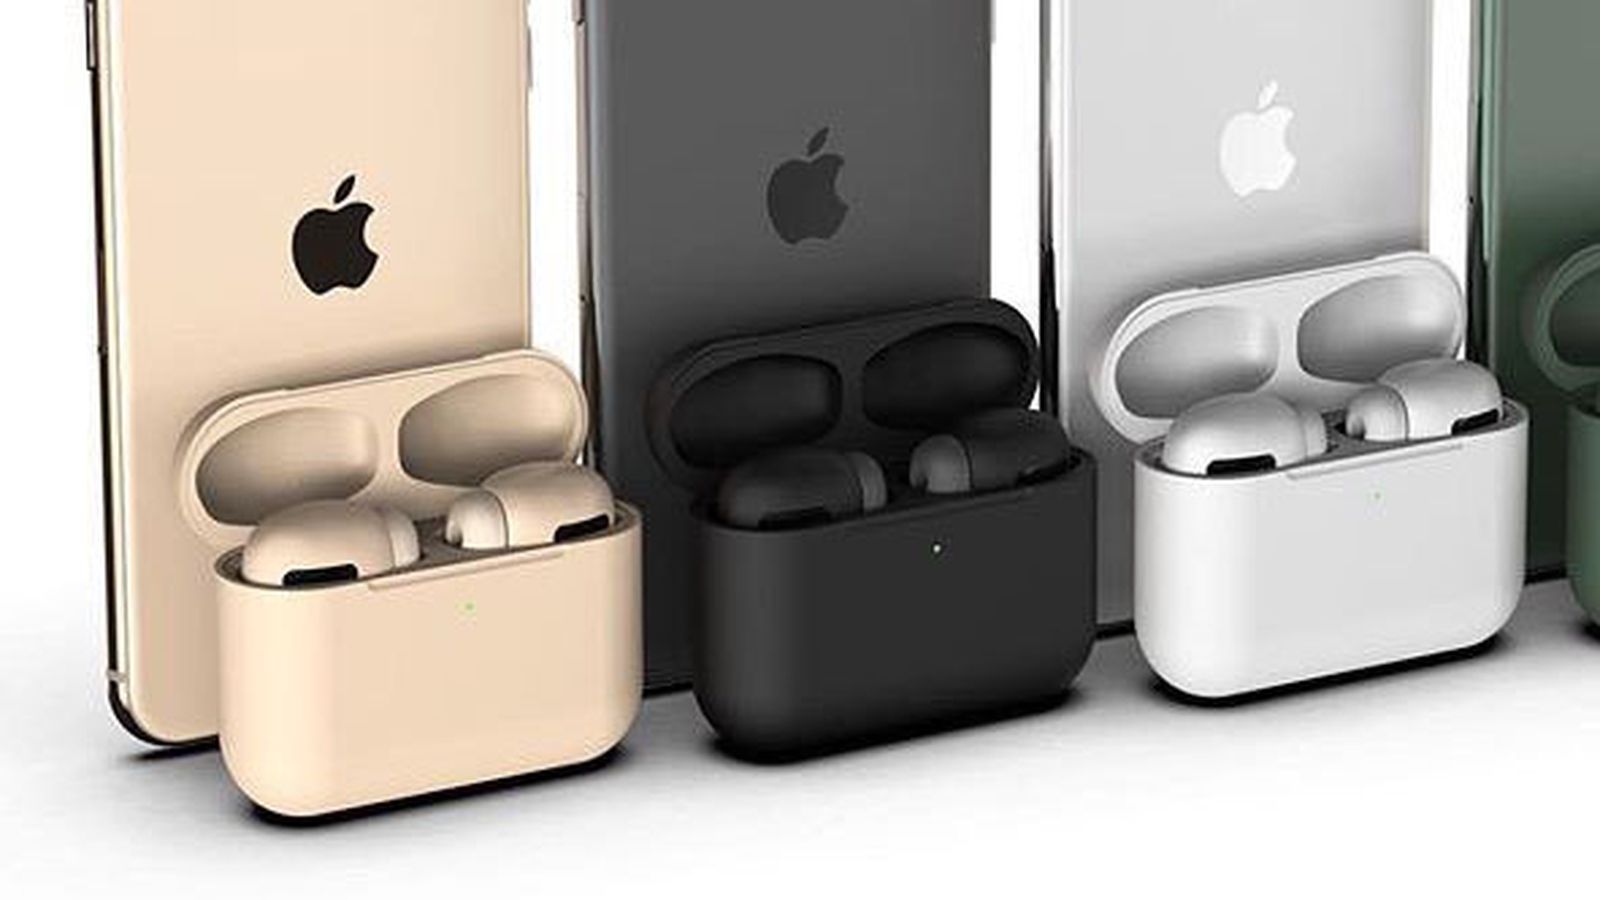 AirPods Pro to Feature New Colors, Black and Midnight Green, According to Chinese Report - MacRumors